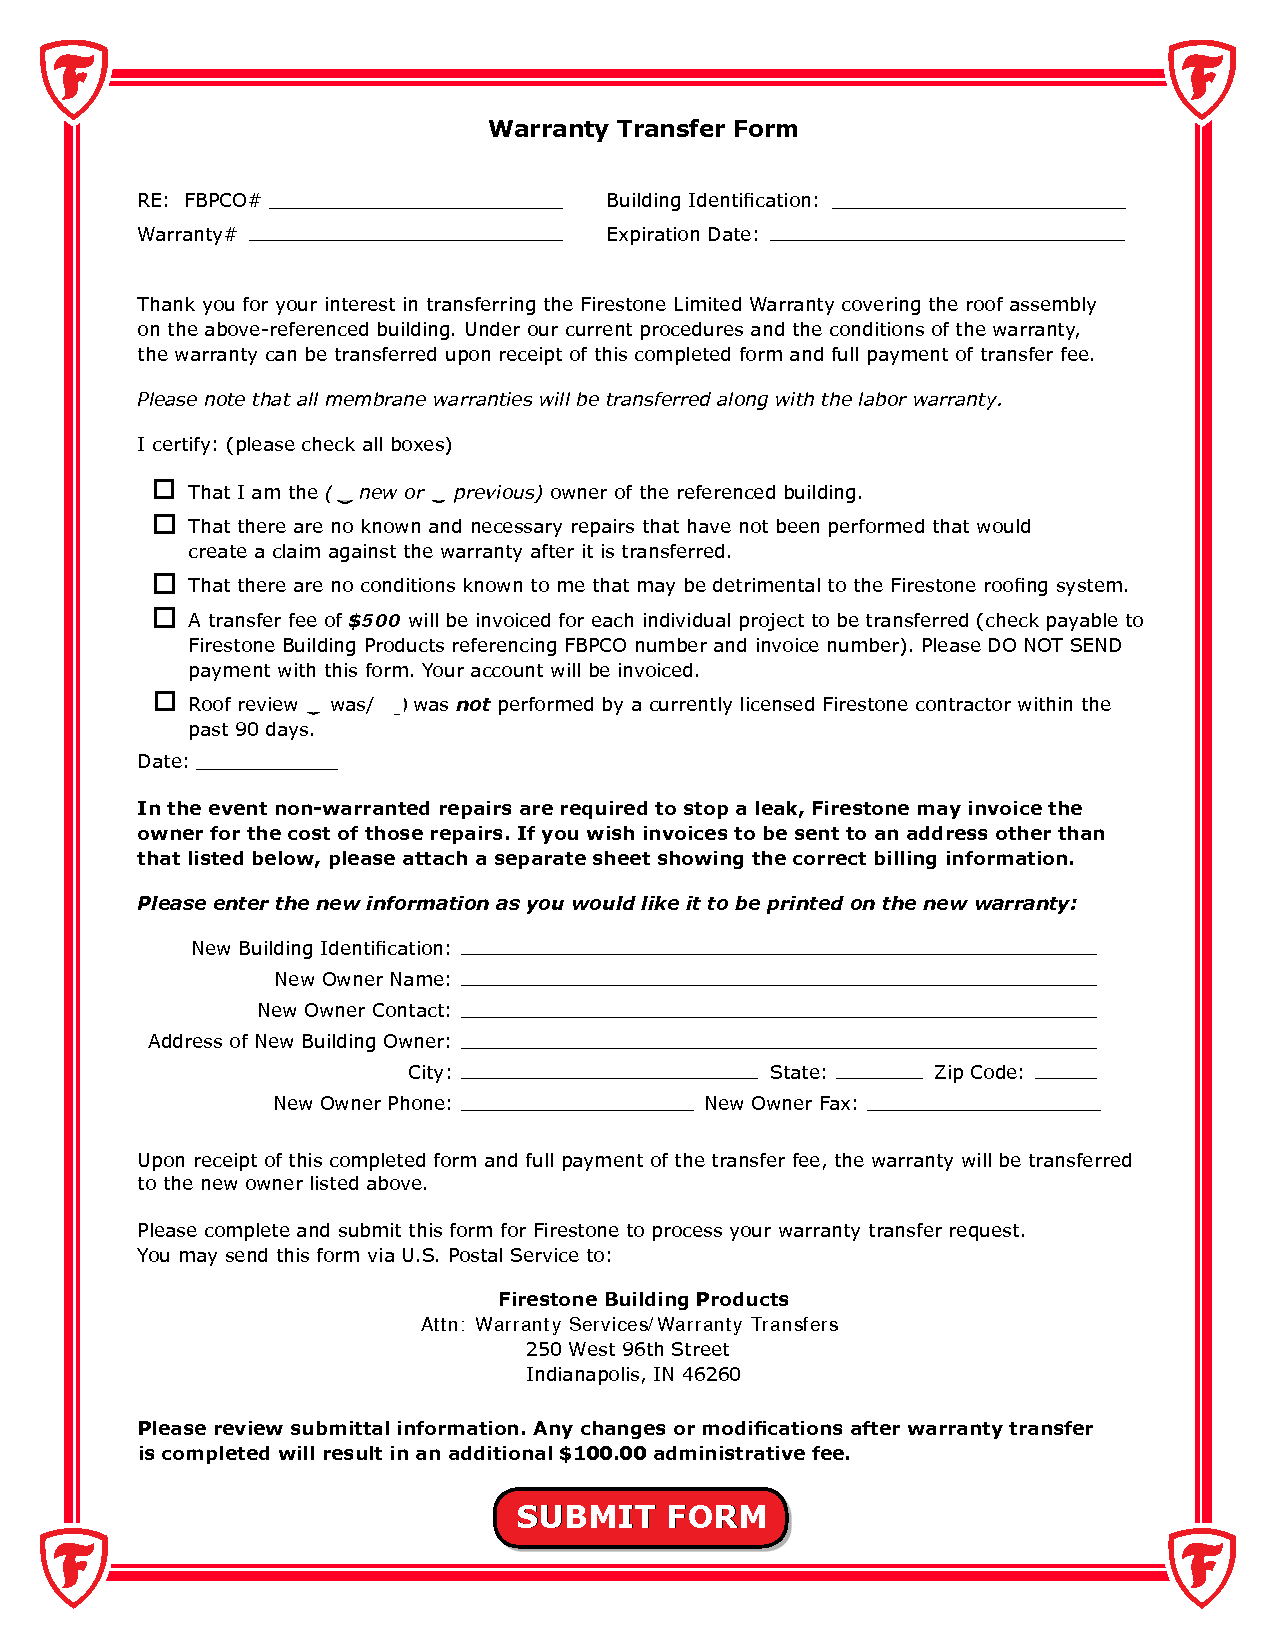 Warranty Template Free Printable Documents